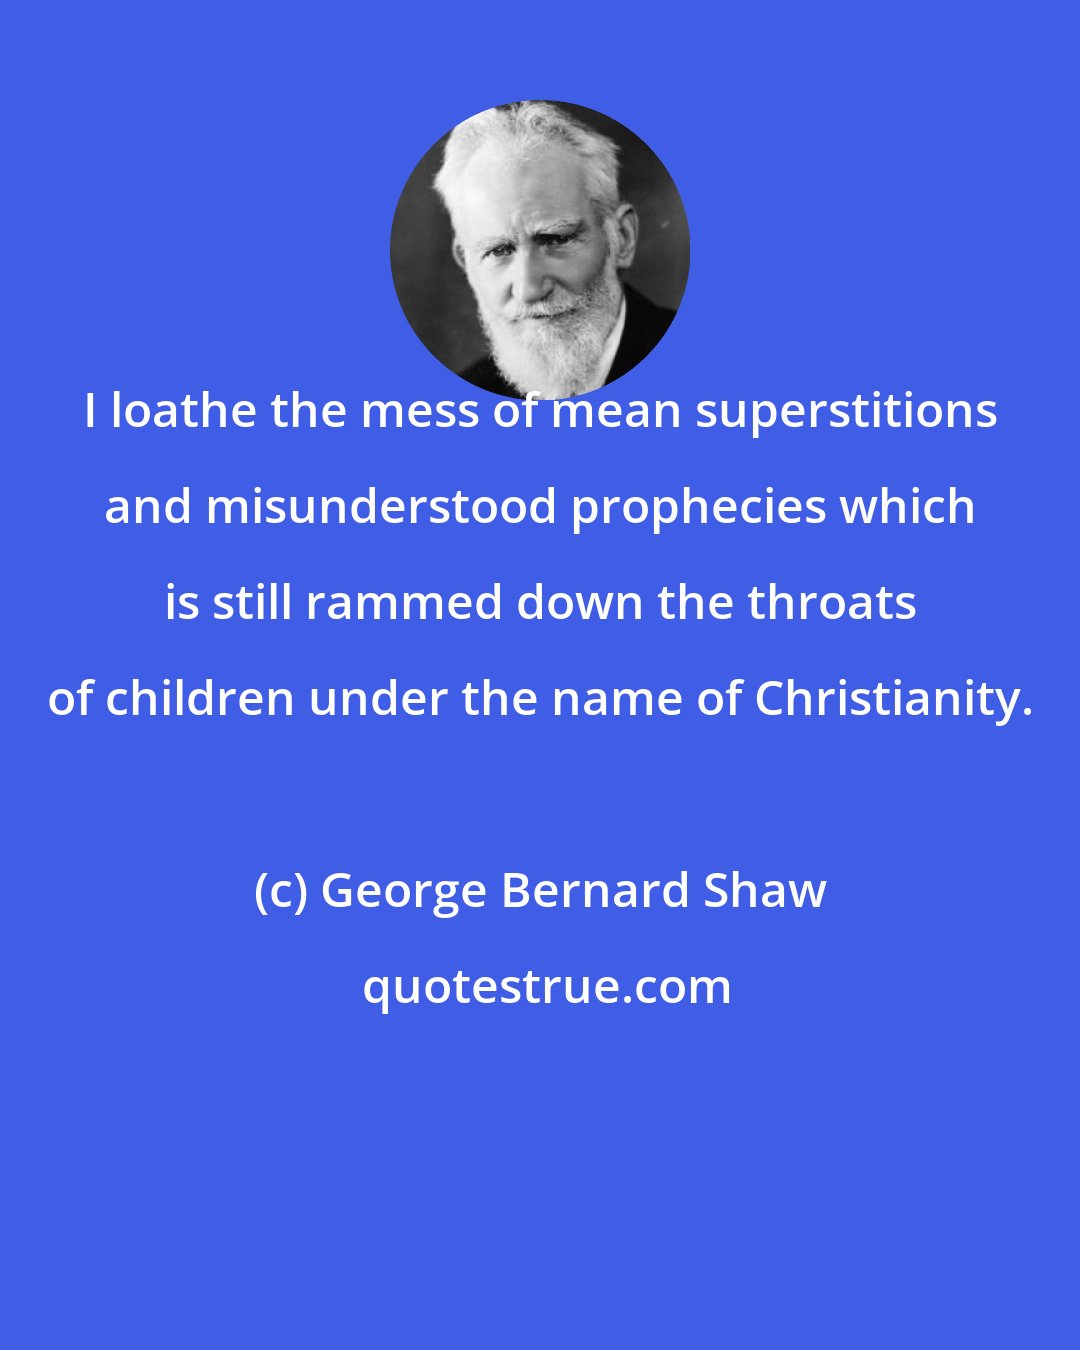 George Bernard Shaw: I loathe the mess of mean superstitions and misunderstood prophecies which is still rammed down the throats of children under the name of Christianity.